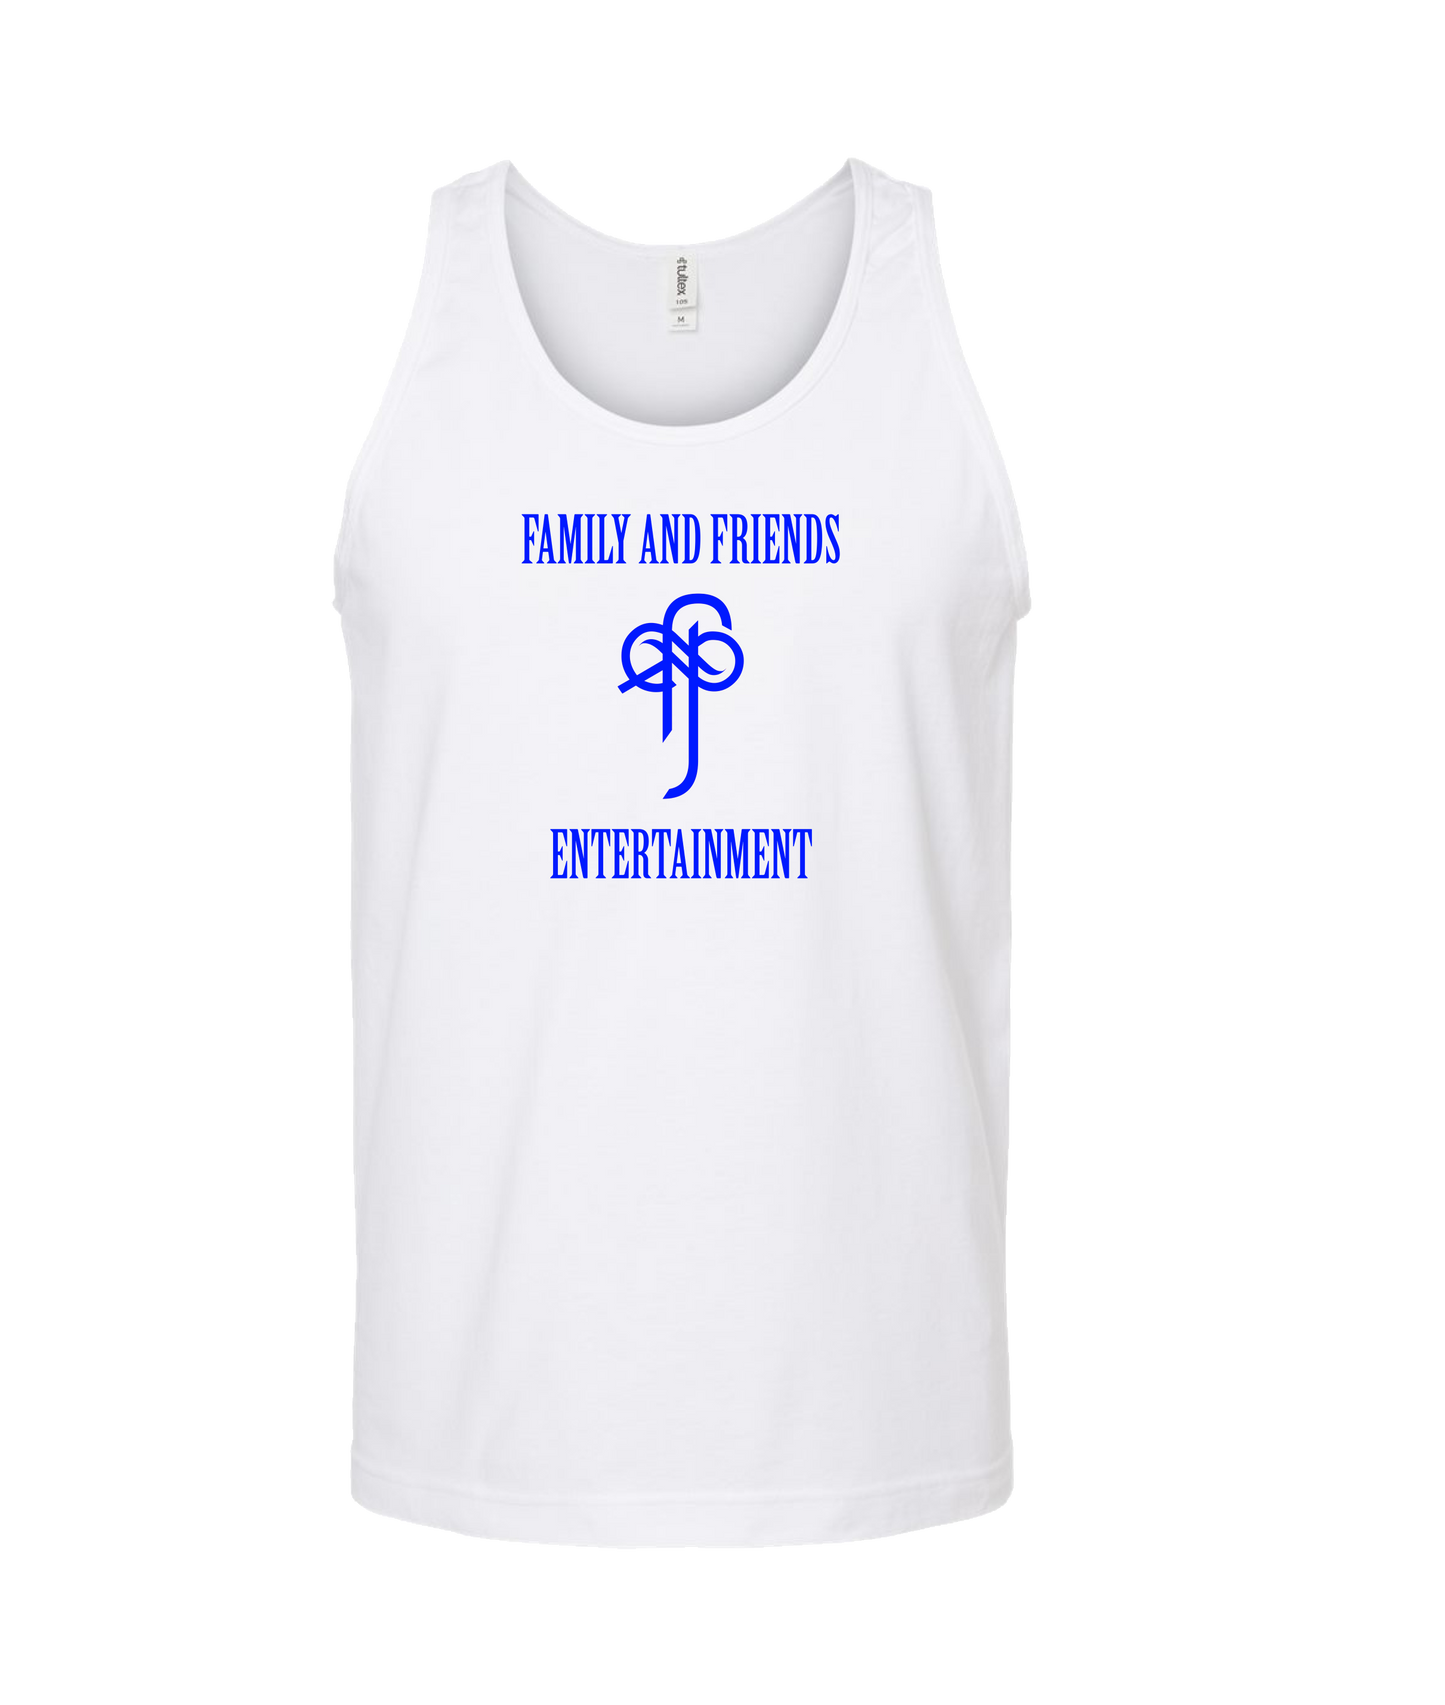 Sincrawford - Family and Friends Ent. (Blue) - White Tank Top